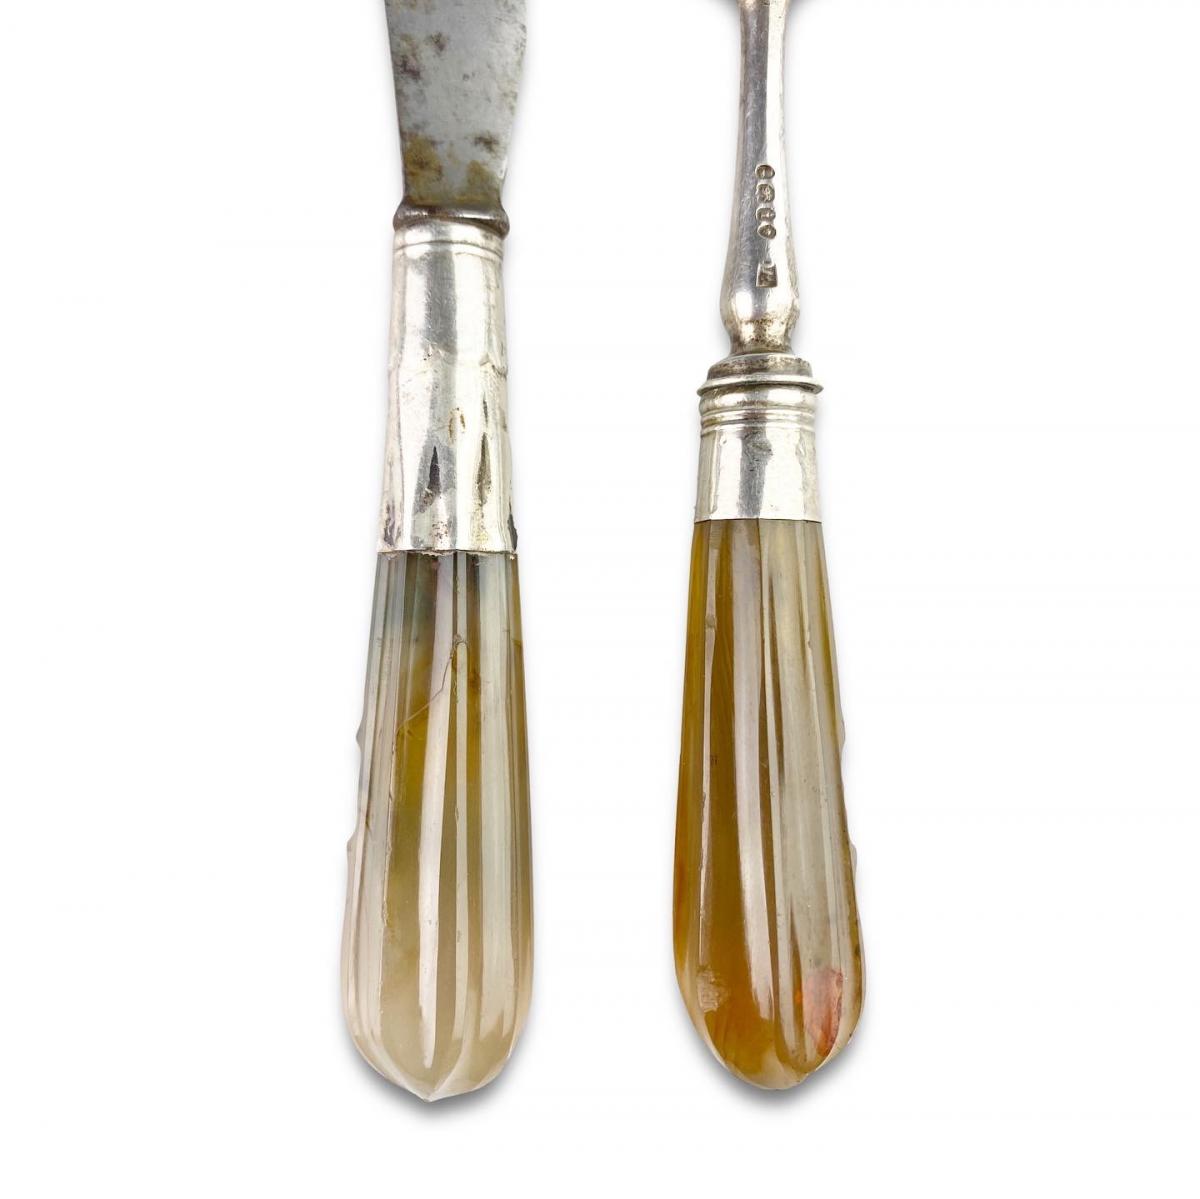 Pair of silver mounted agate cutlery. English, mid 18th century